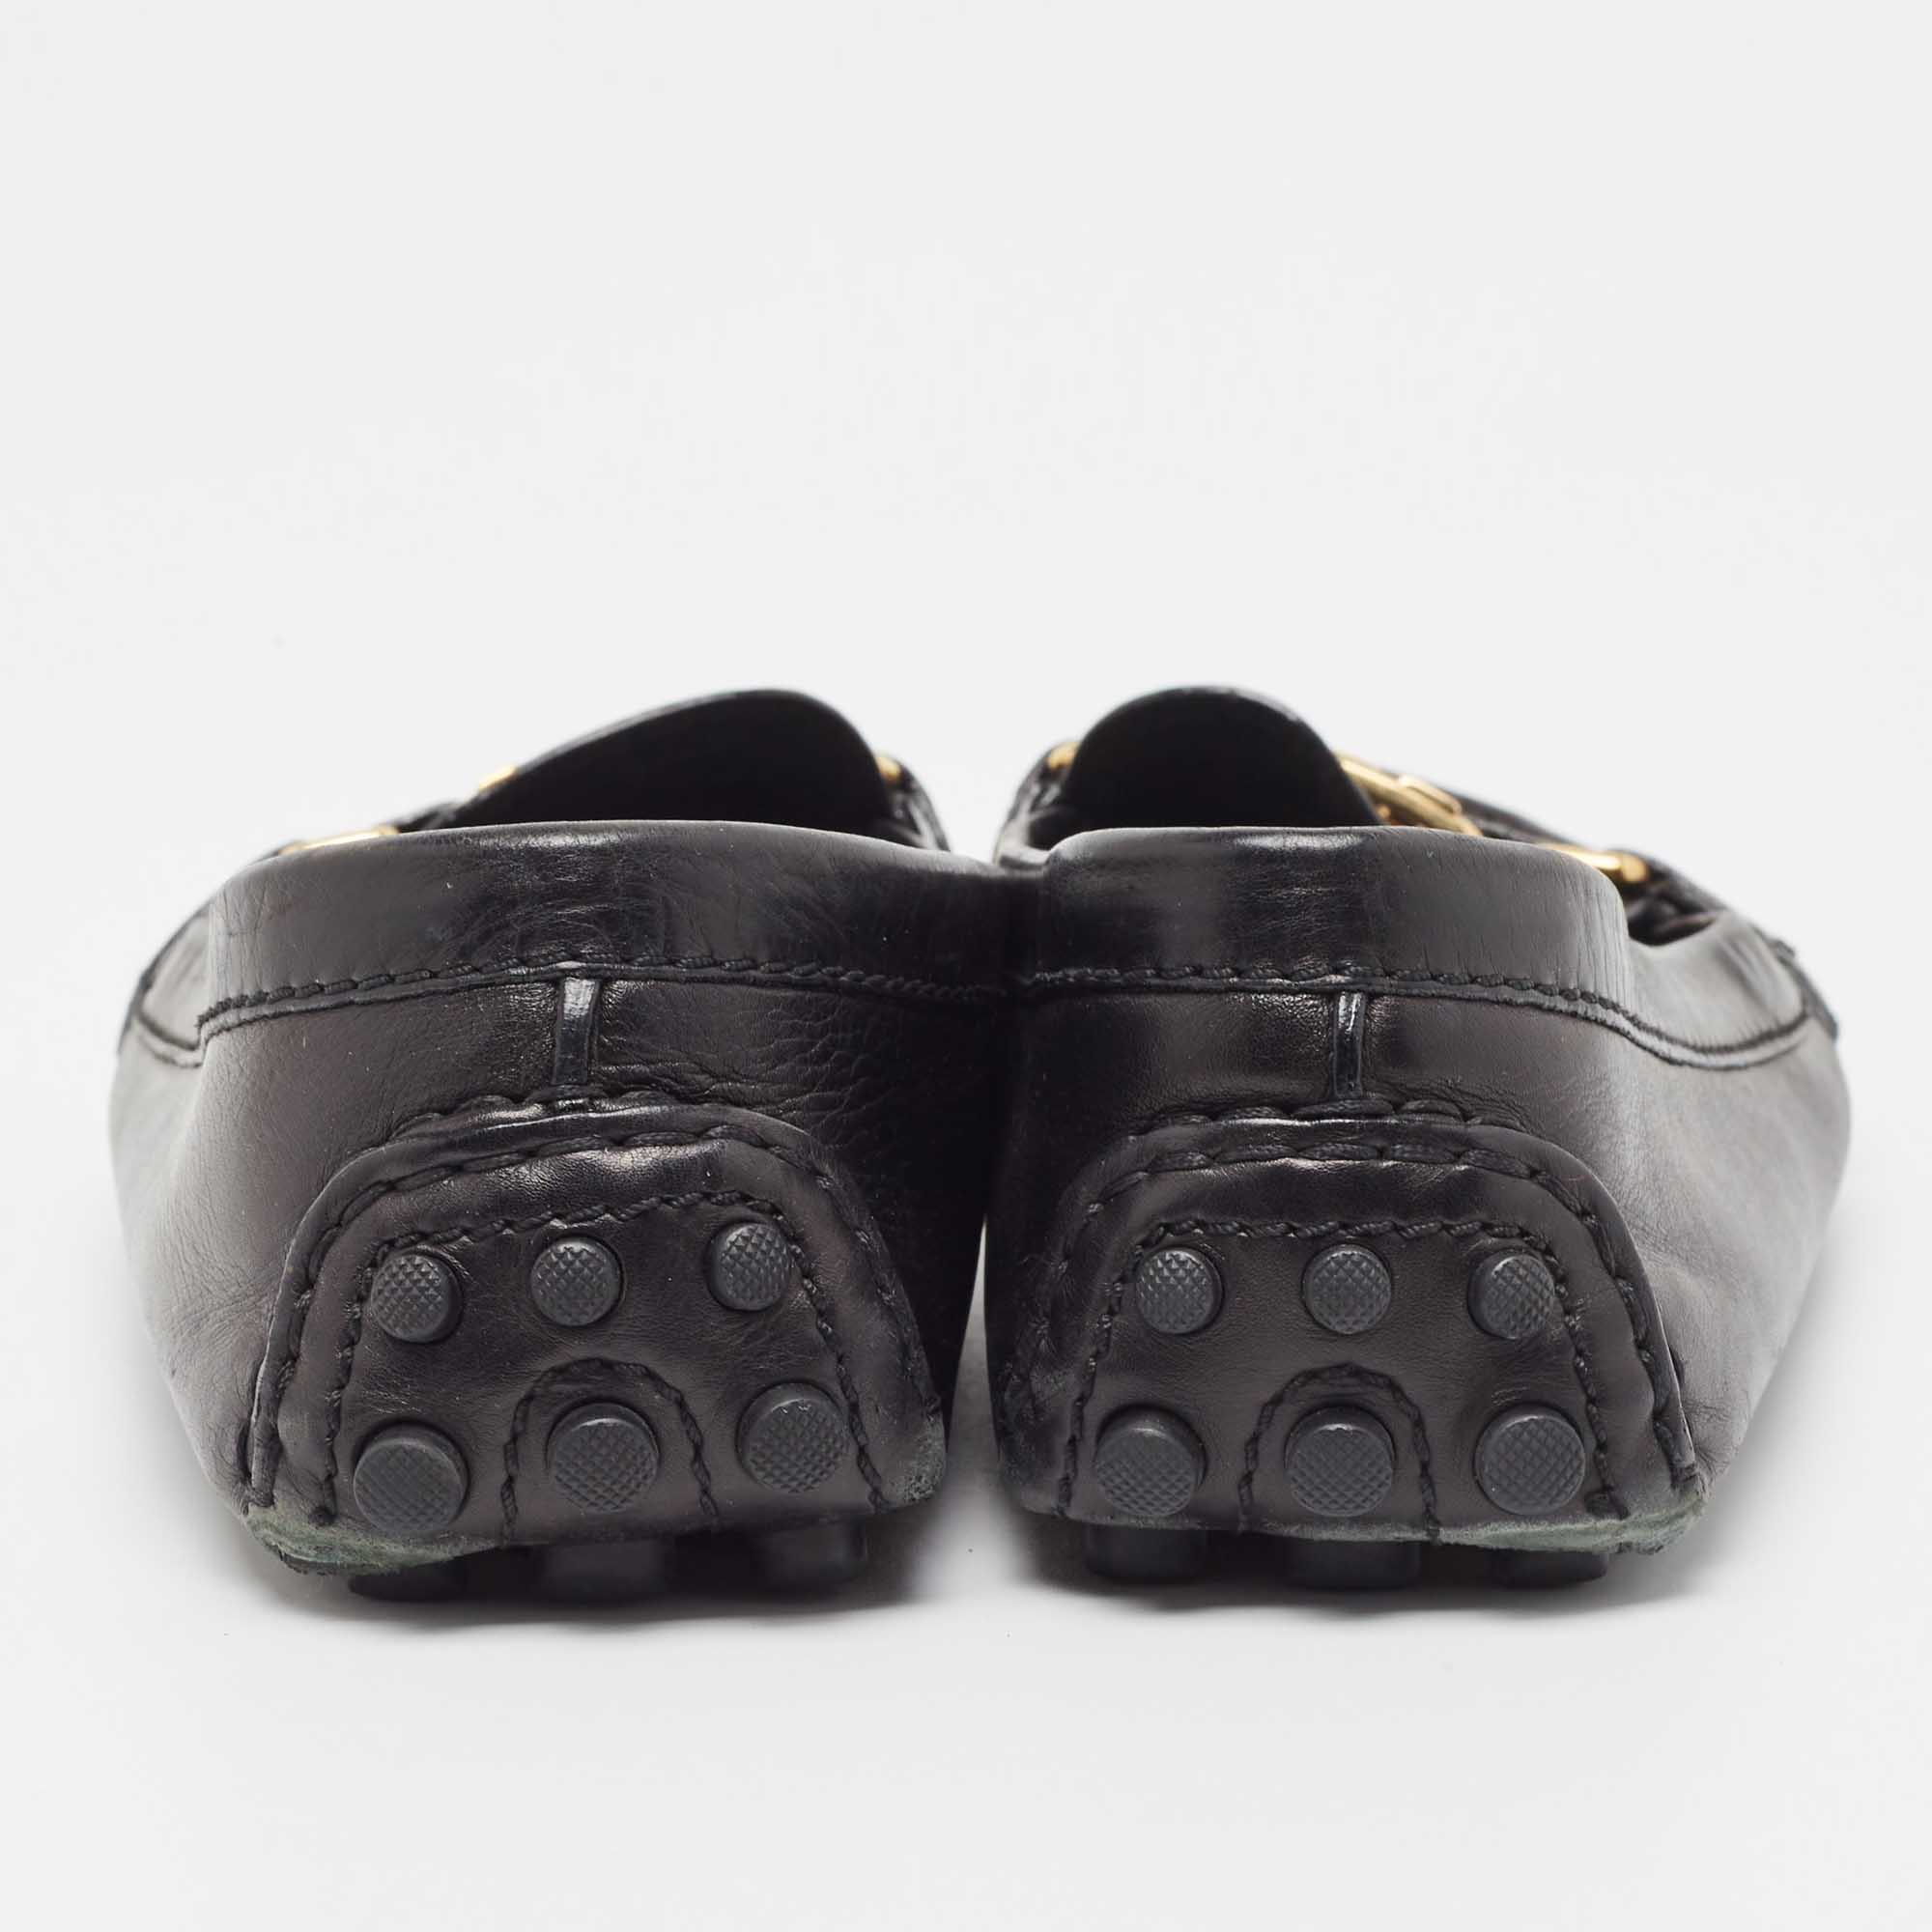 Louis Vuitton Black Leather Oxford Loafers Size 37.5